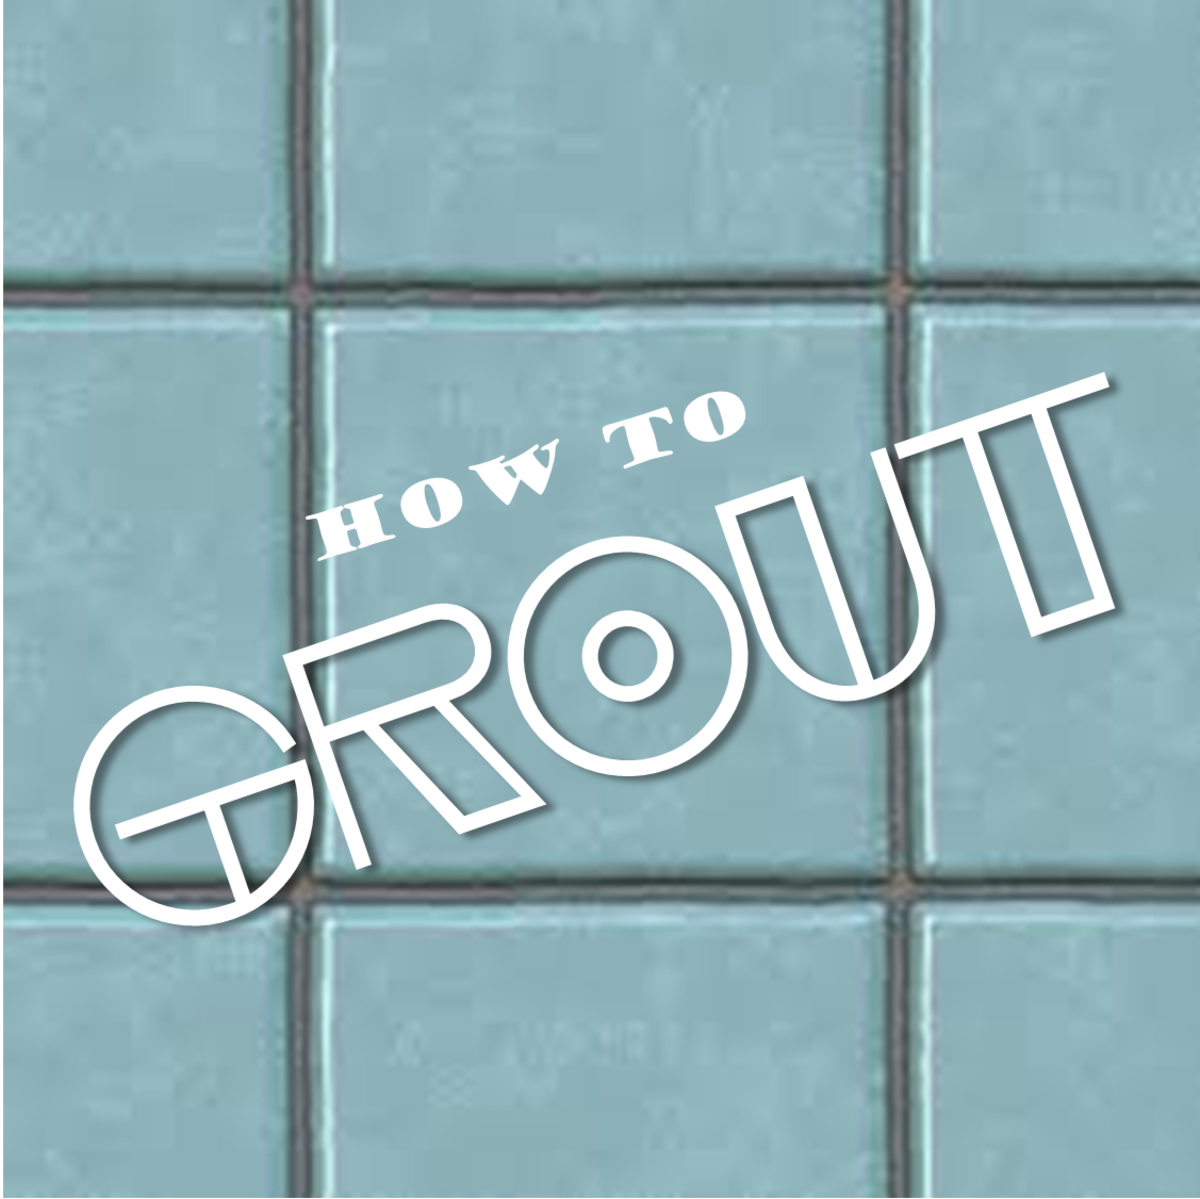 Learn how to apply ceramic tile grout.